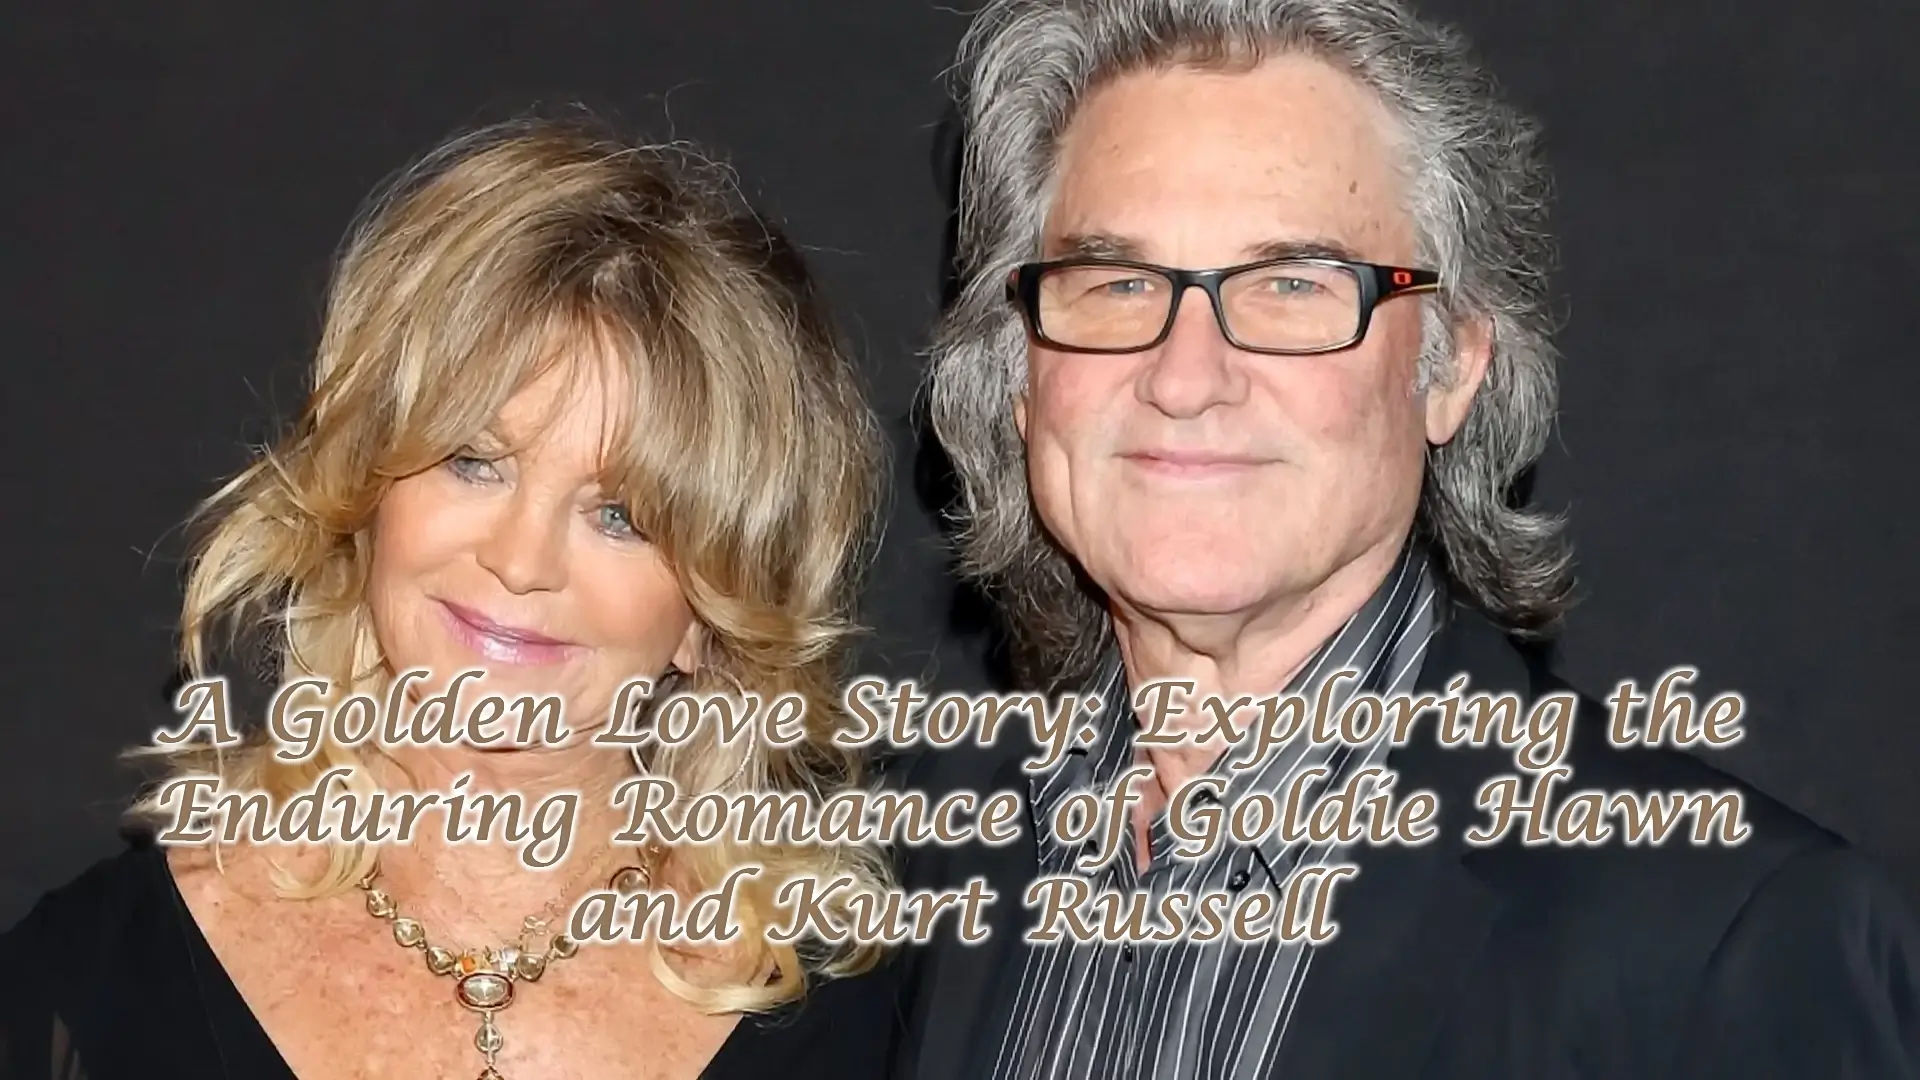 A Golden Love Story: Exploring the Enduring Romance of Goldie Hawn and Kurt Russell